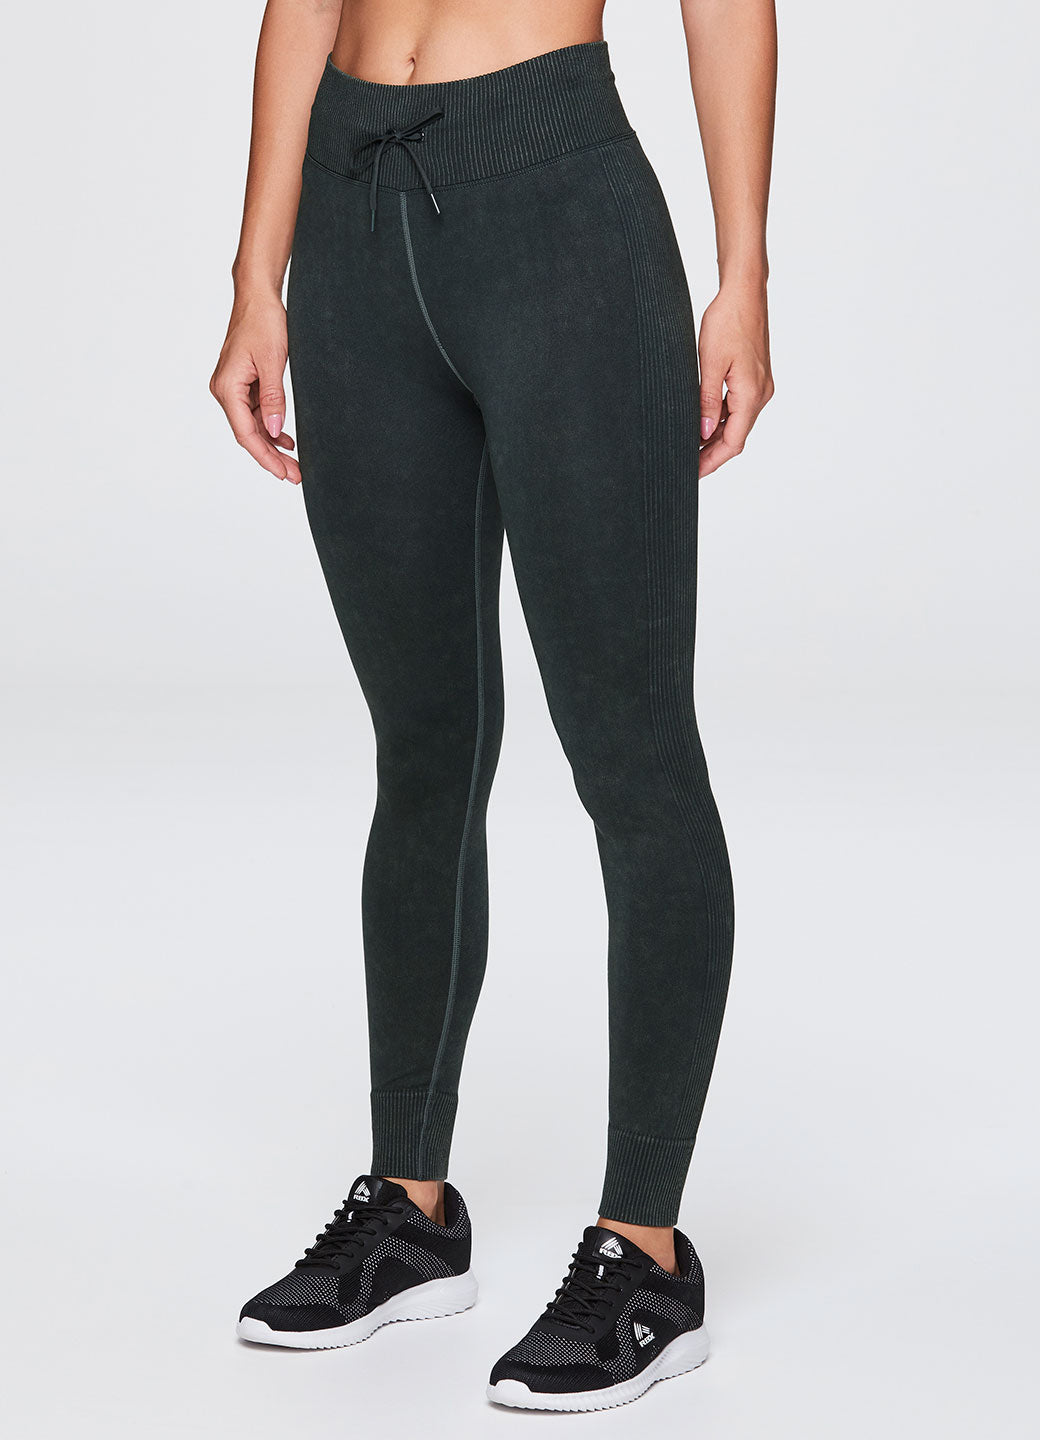 Stash It Fleece Lined Legging - RBX Active in 2023  Leggings are not pants,  Shopping outfit, Soft leggings